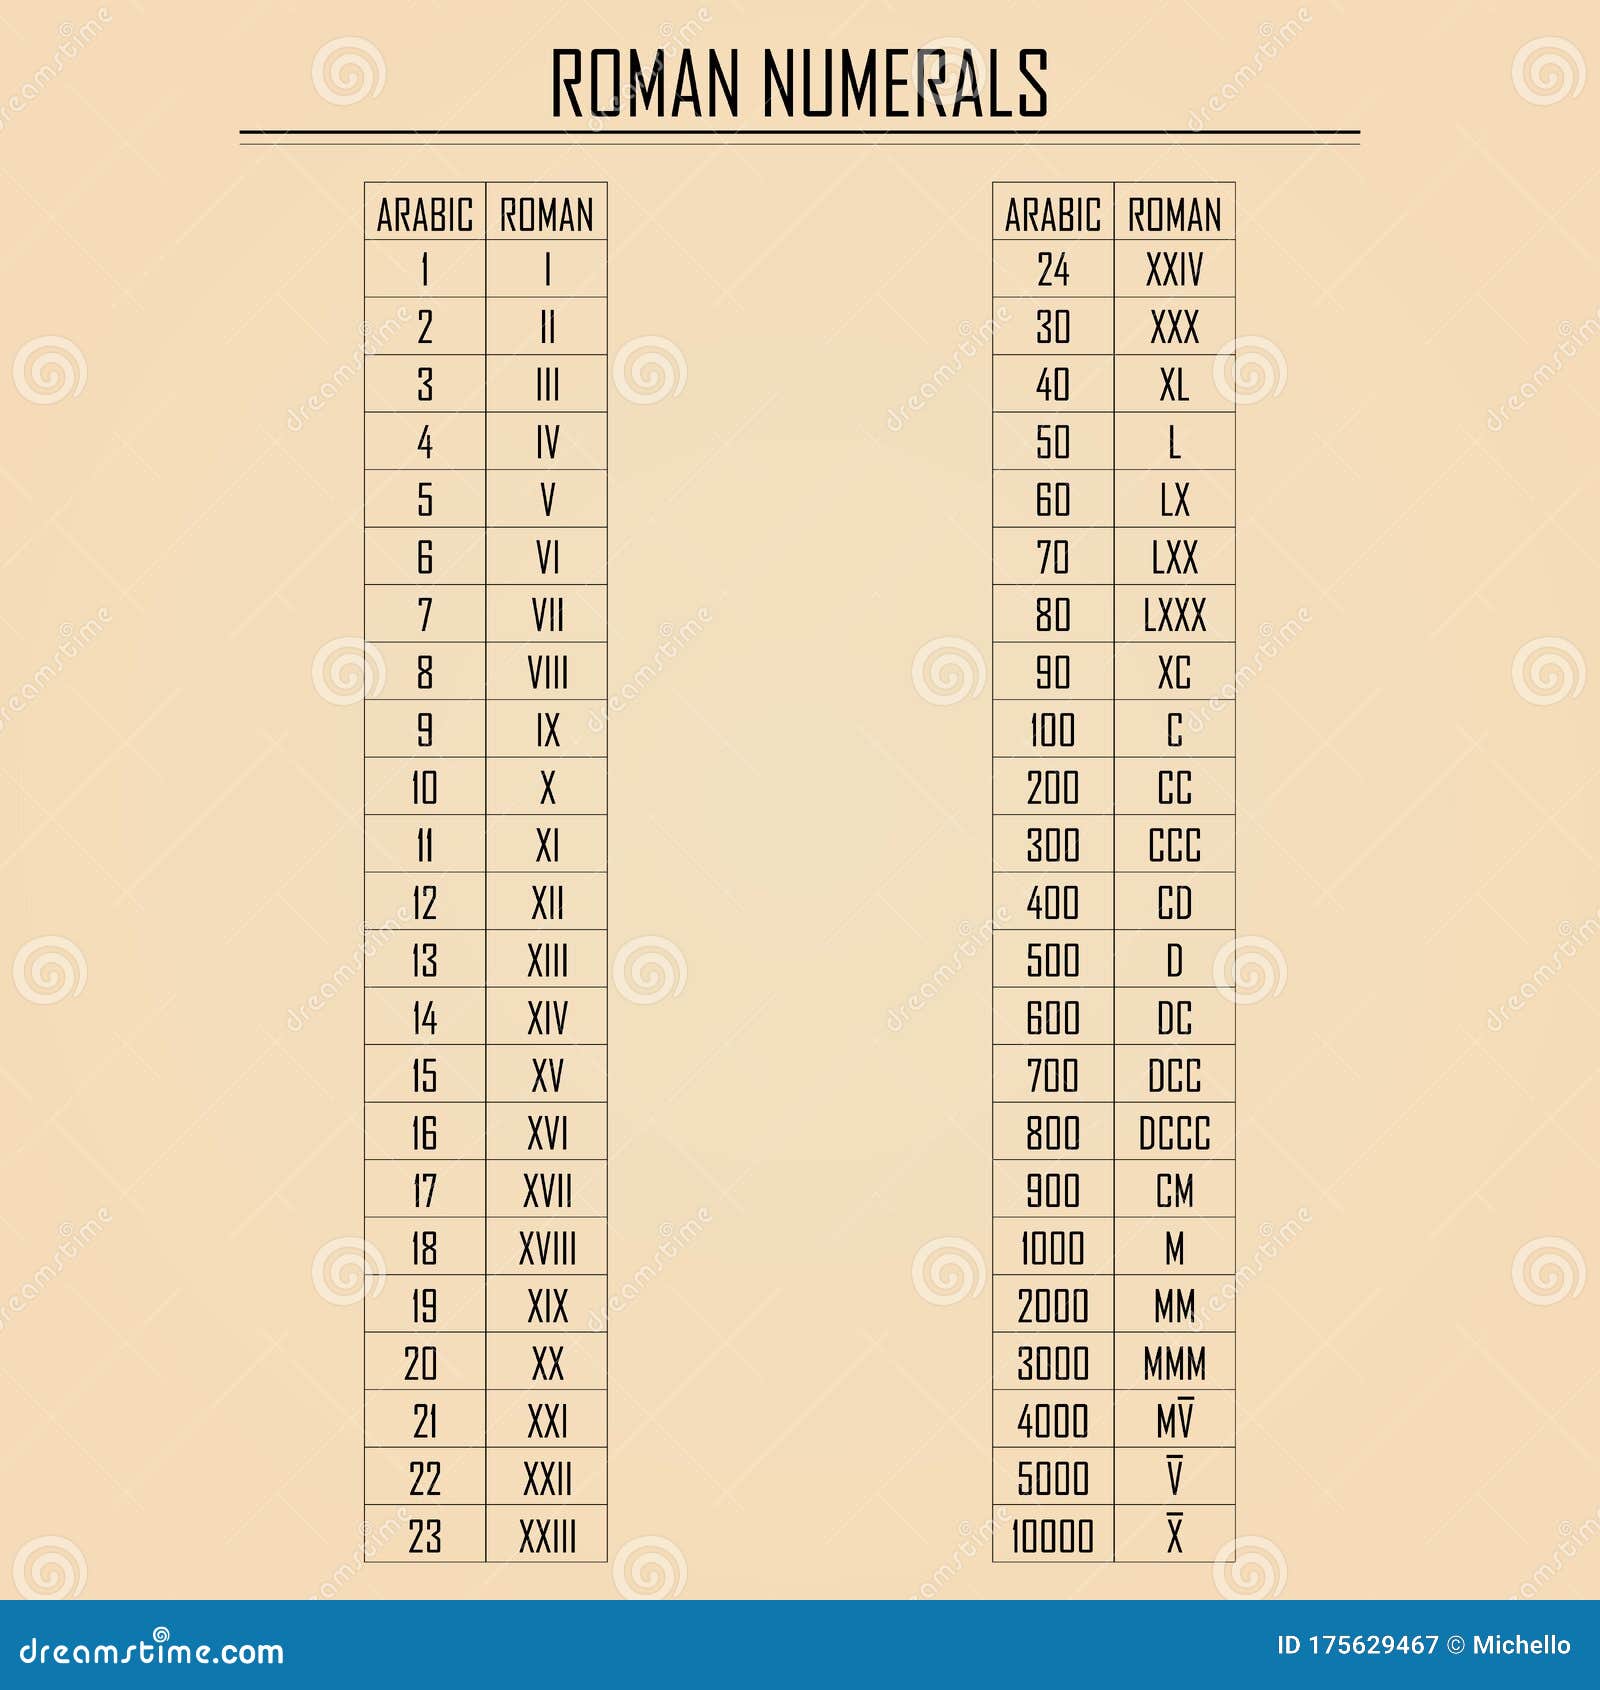 alphabet-roman-numerals-1-to-1000-click-on-any-roman-numeral-to-discover-how-to-read-it